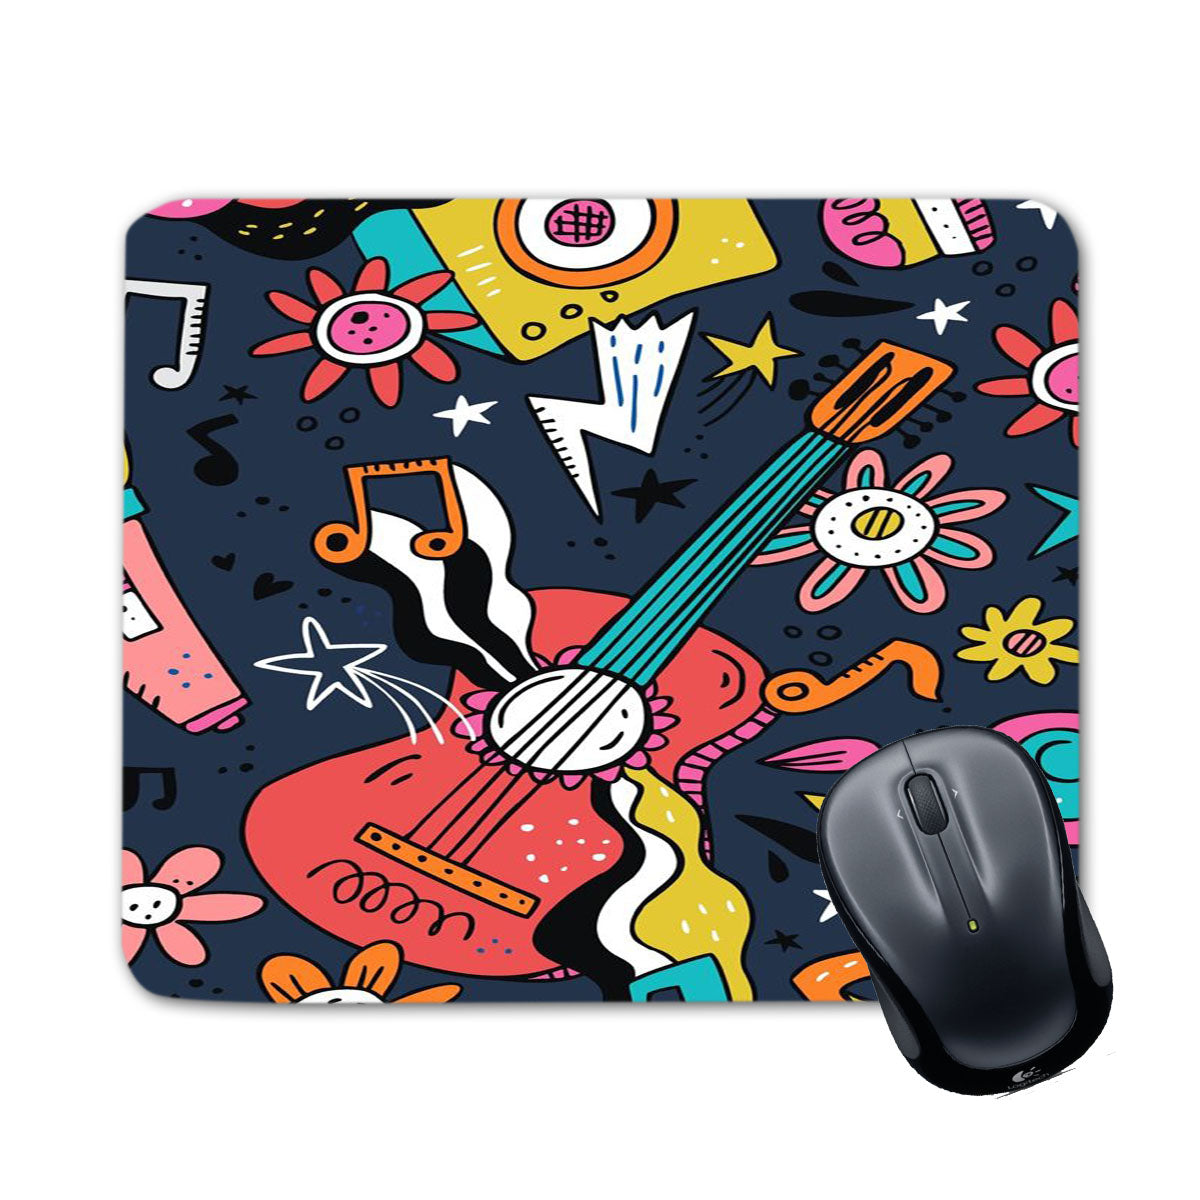 Chillaao Music Comic Abstract Mouse Pad